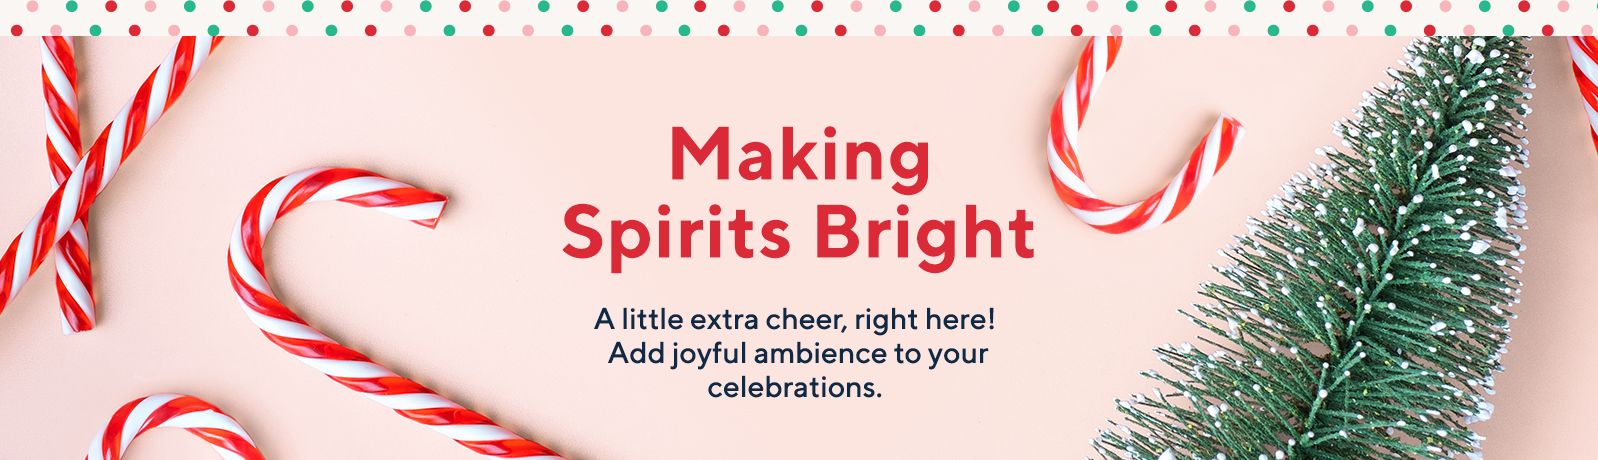 Making Spirits Bright - A little extra cheer, right here! Add joyful ambience to your celebrations.